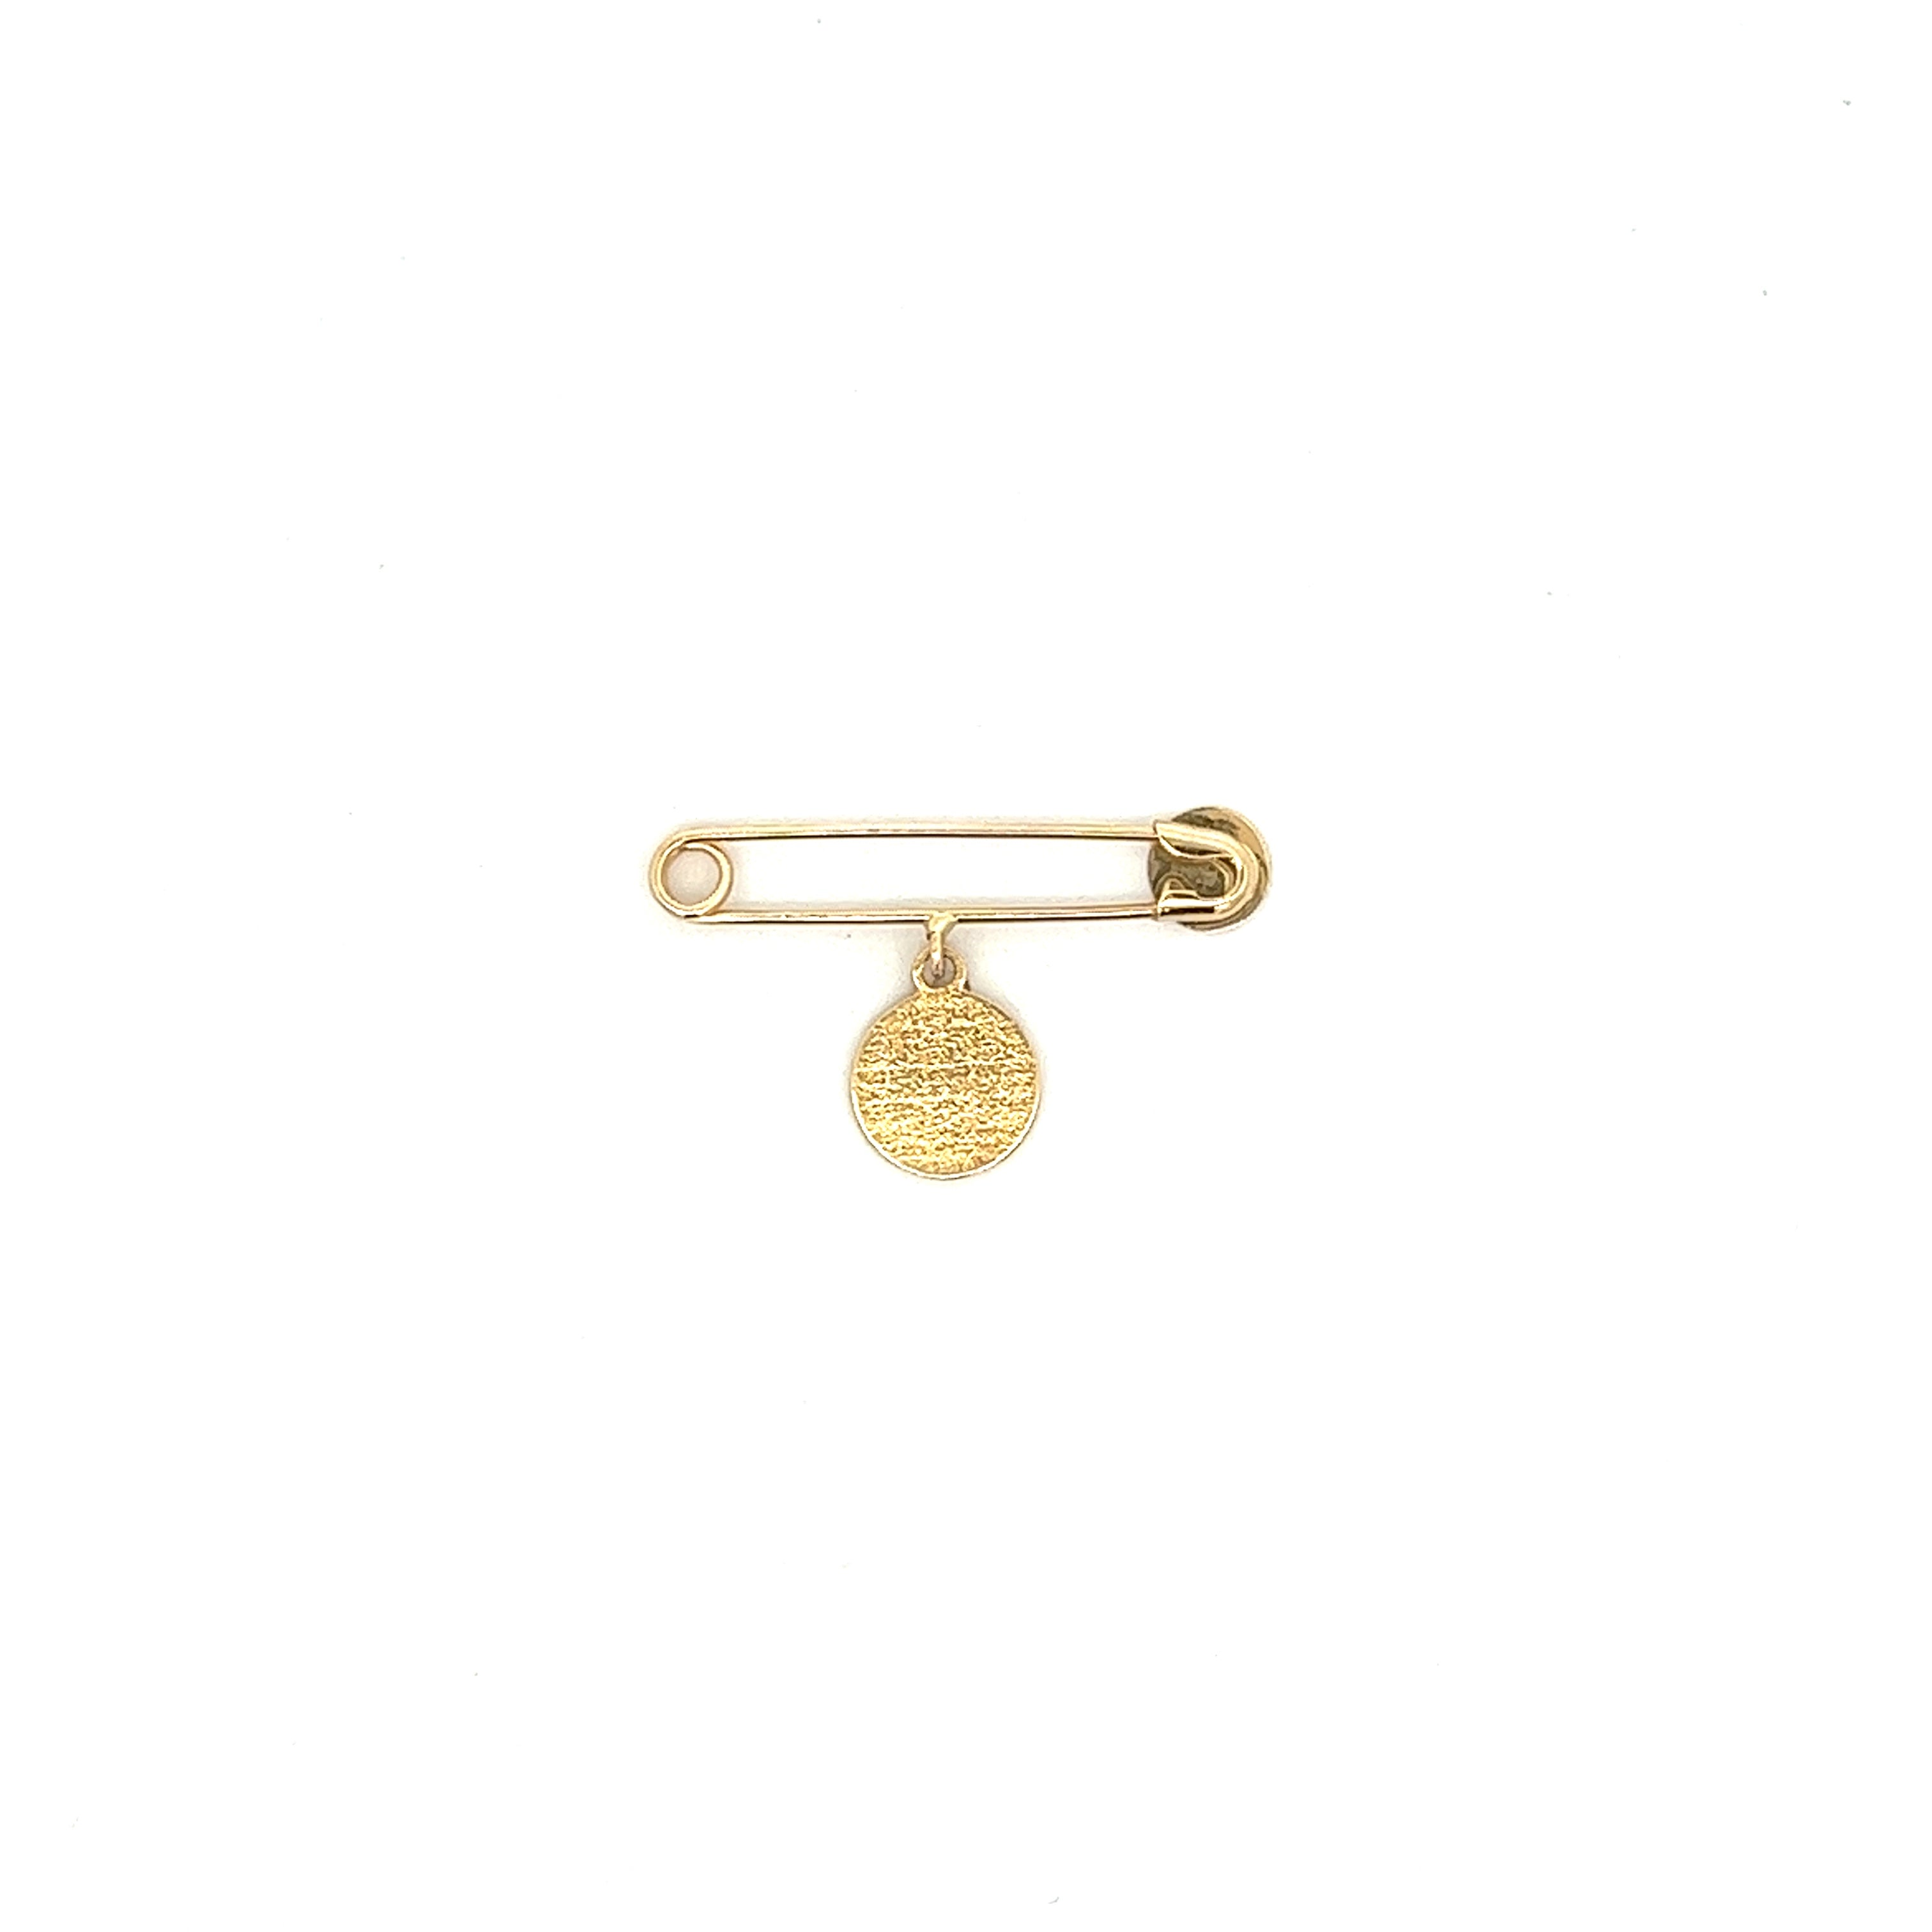 14K GOLD PIN WITH GUARDIAN ANGEL MEDAL